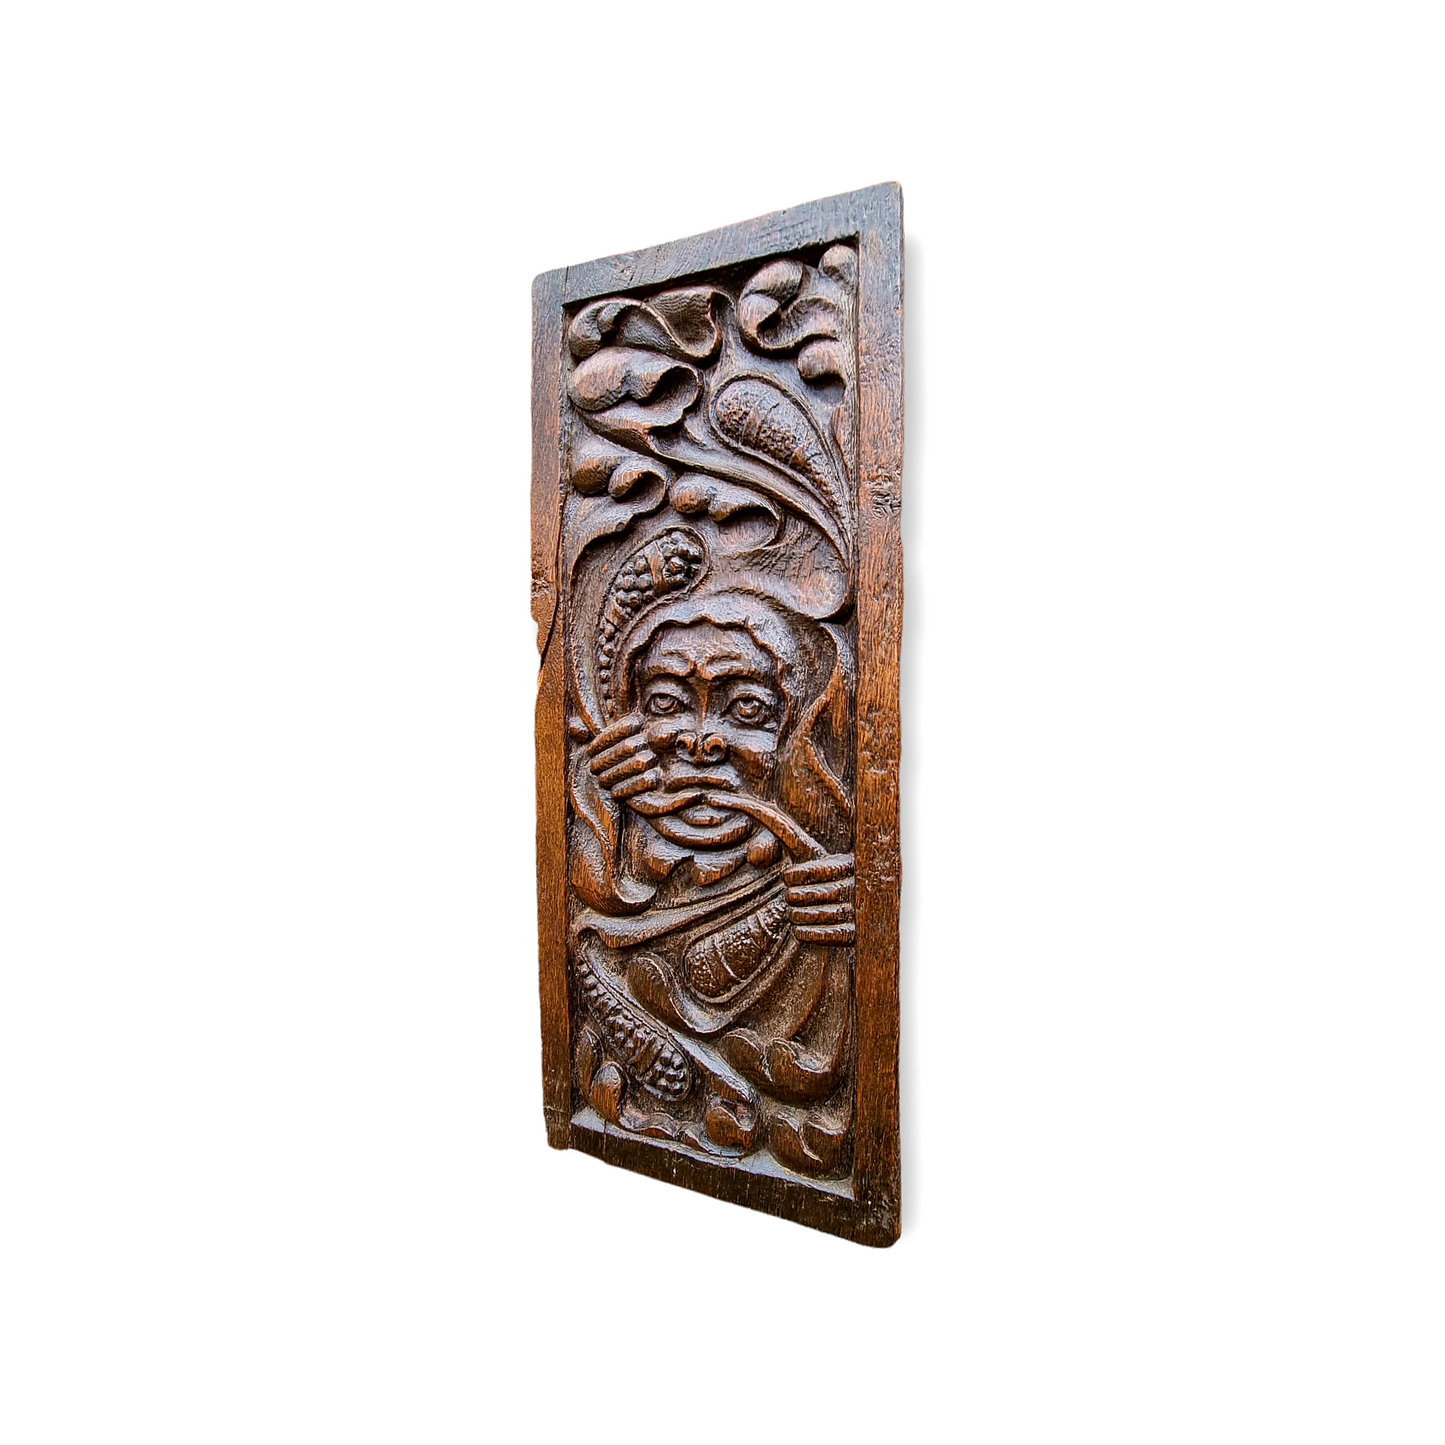 Rare Pair of 16th Century Dutch Antique Carved Oak Panels Depicting Wild Men of The Woods or Woodwose / Wodewose